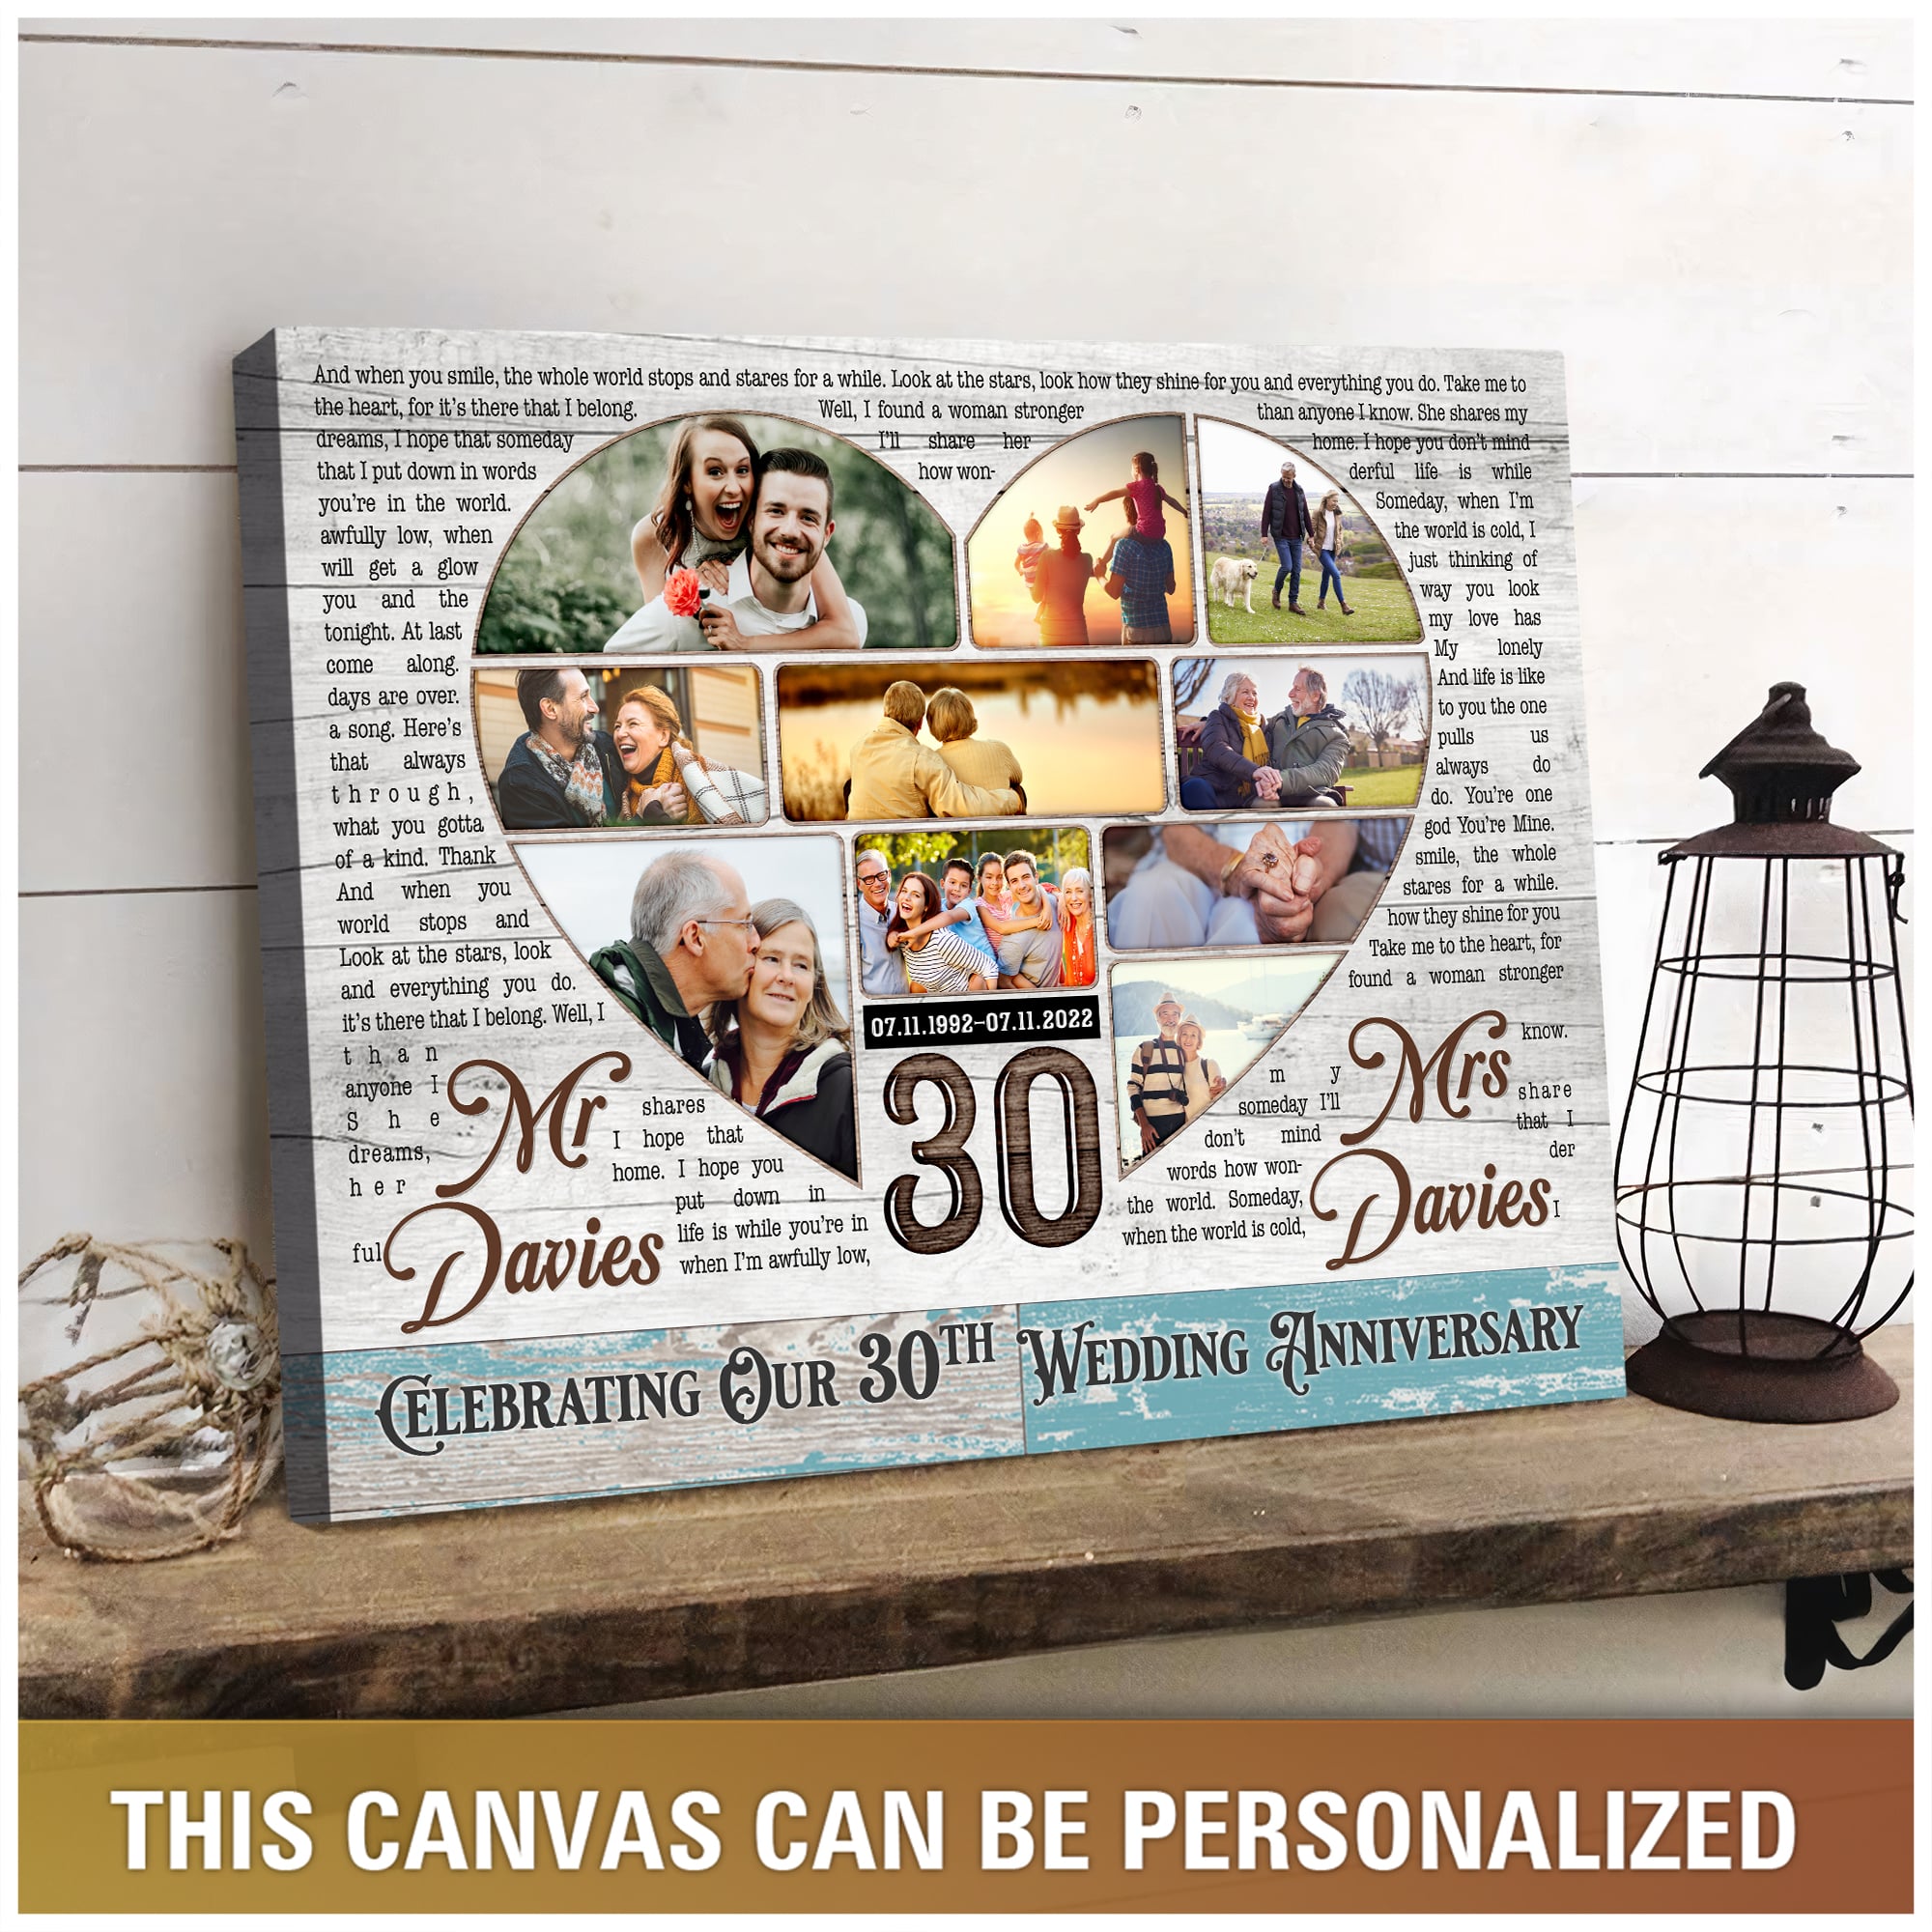 https://images.ohcanvas.com/ohcanvas_com/2022/07/28033740/30th-wedding-anniversary-gift-for-couple-personalized-canvas-with-song-lyrics.jpg